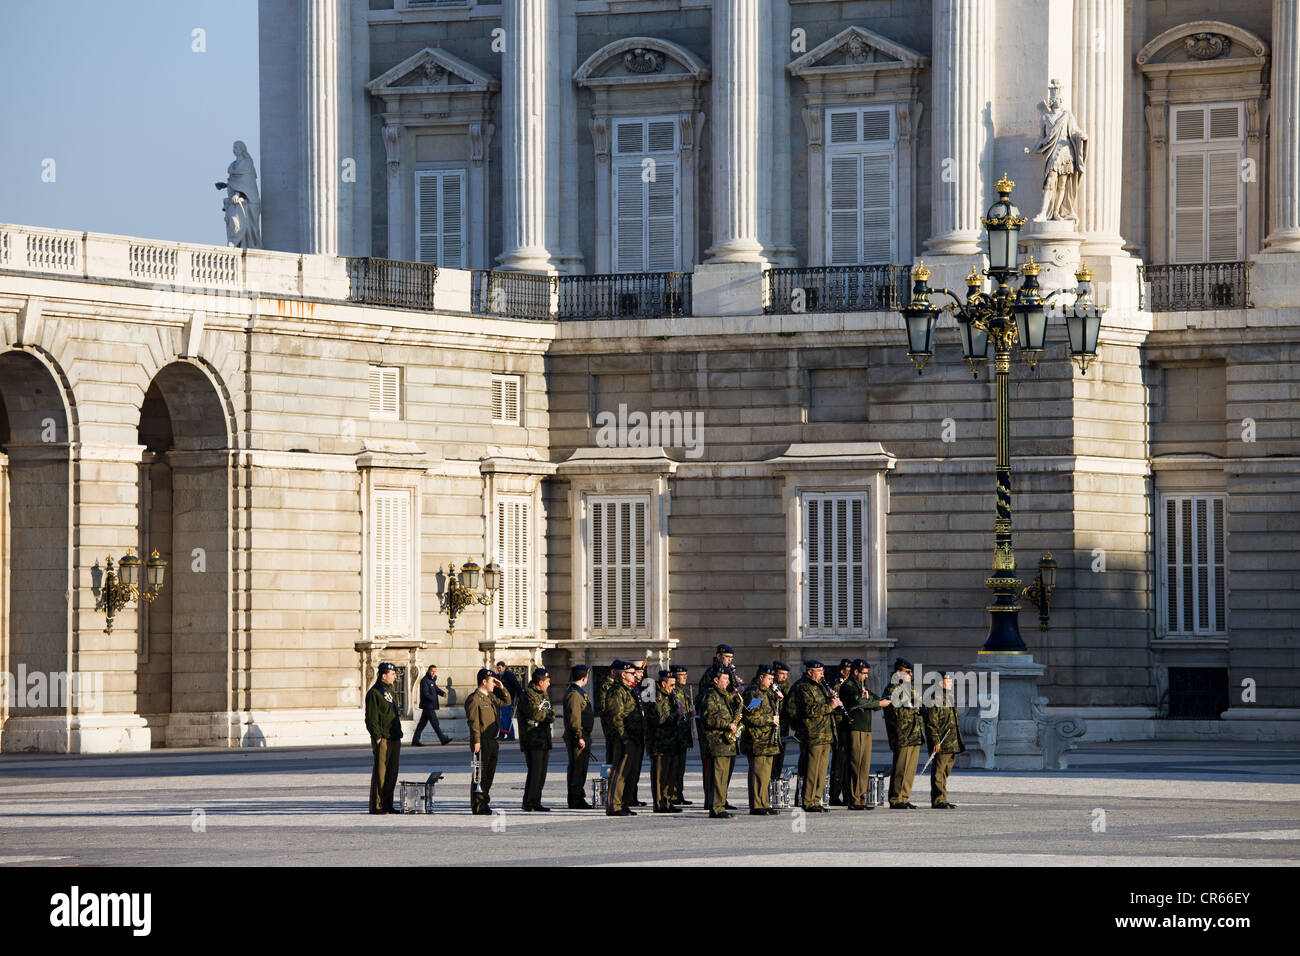 Military music band in front of the Royal Palace (Spanish: Palacio Real) in Madrid, Spain. Stock Photo